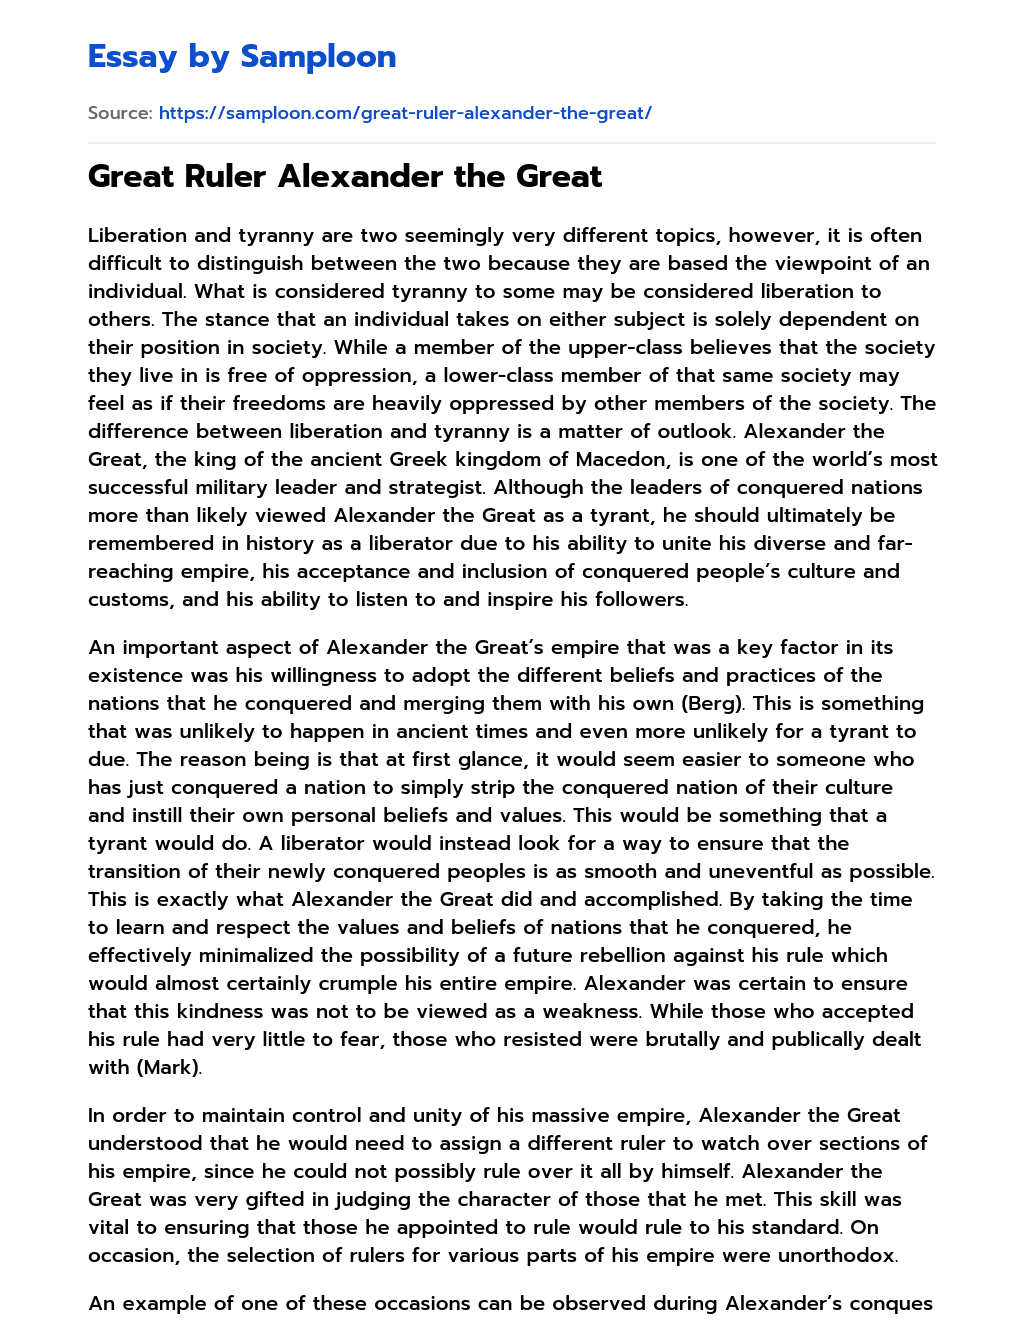 Great Ruler Alexander the Great essay